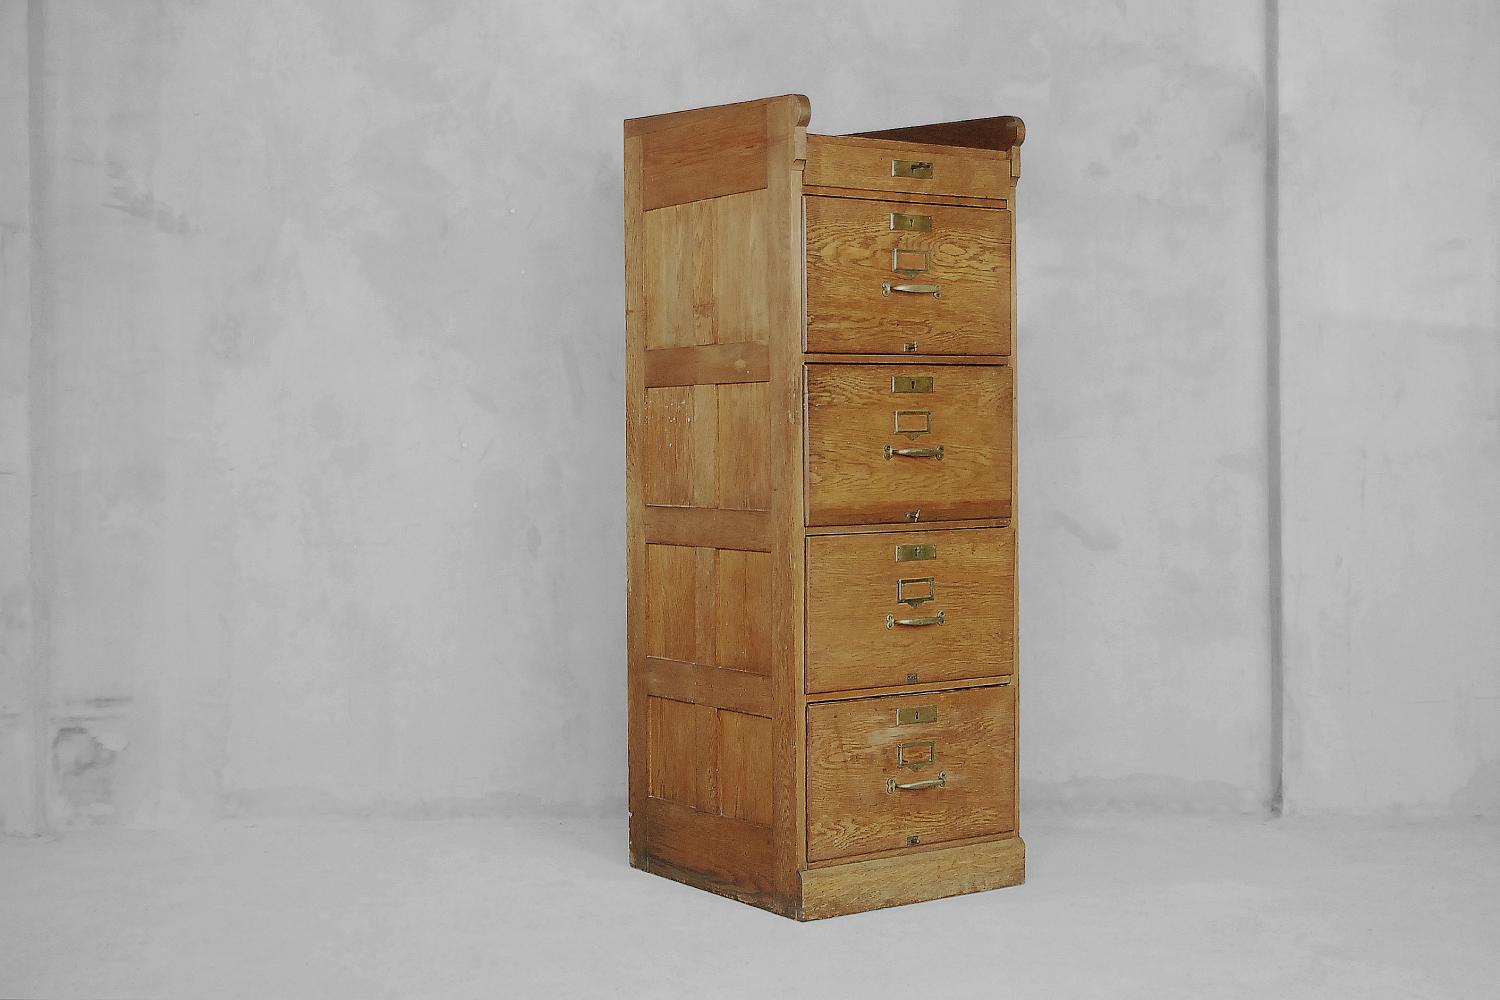 This antique cabinet was manufactured in England in first half of the 20th century. It is made from solid oak wood. It has four deep drawers with compartments and one smaller under the top. The drawers have a file system and handles in brass. One